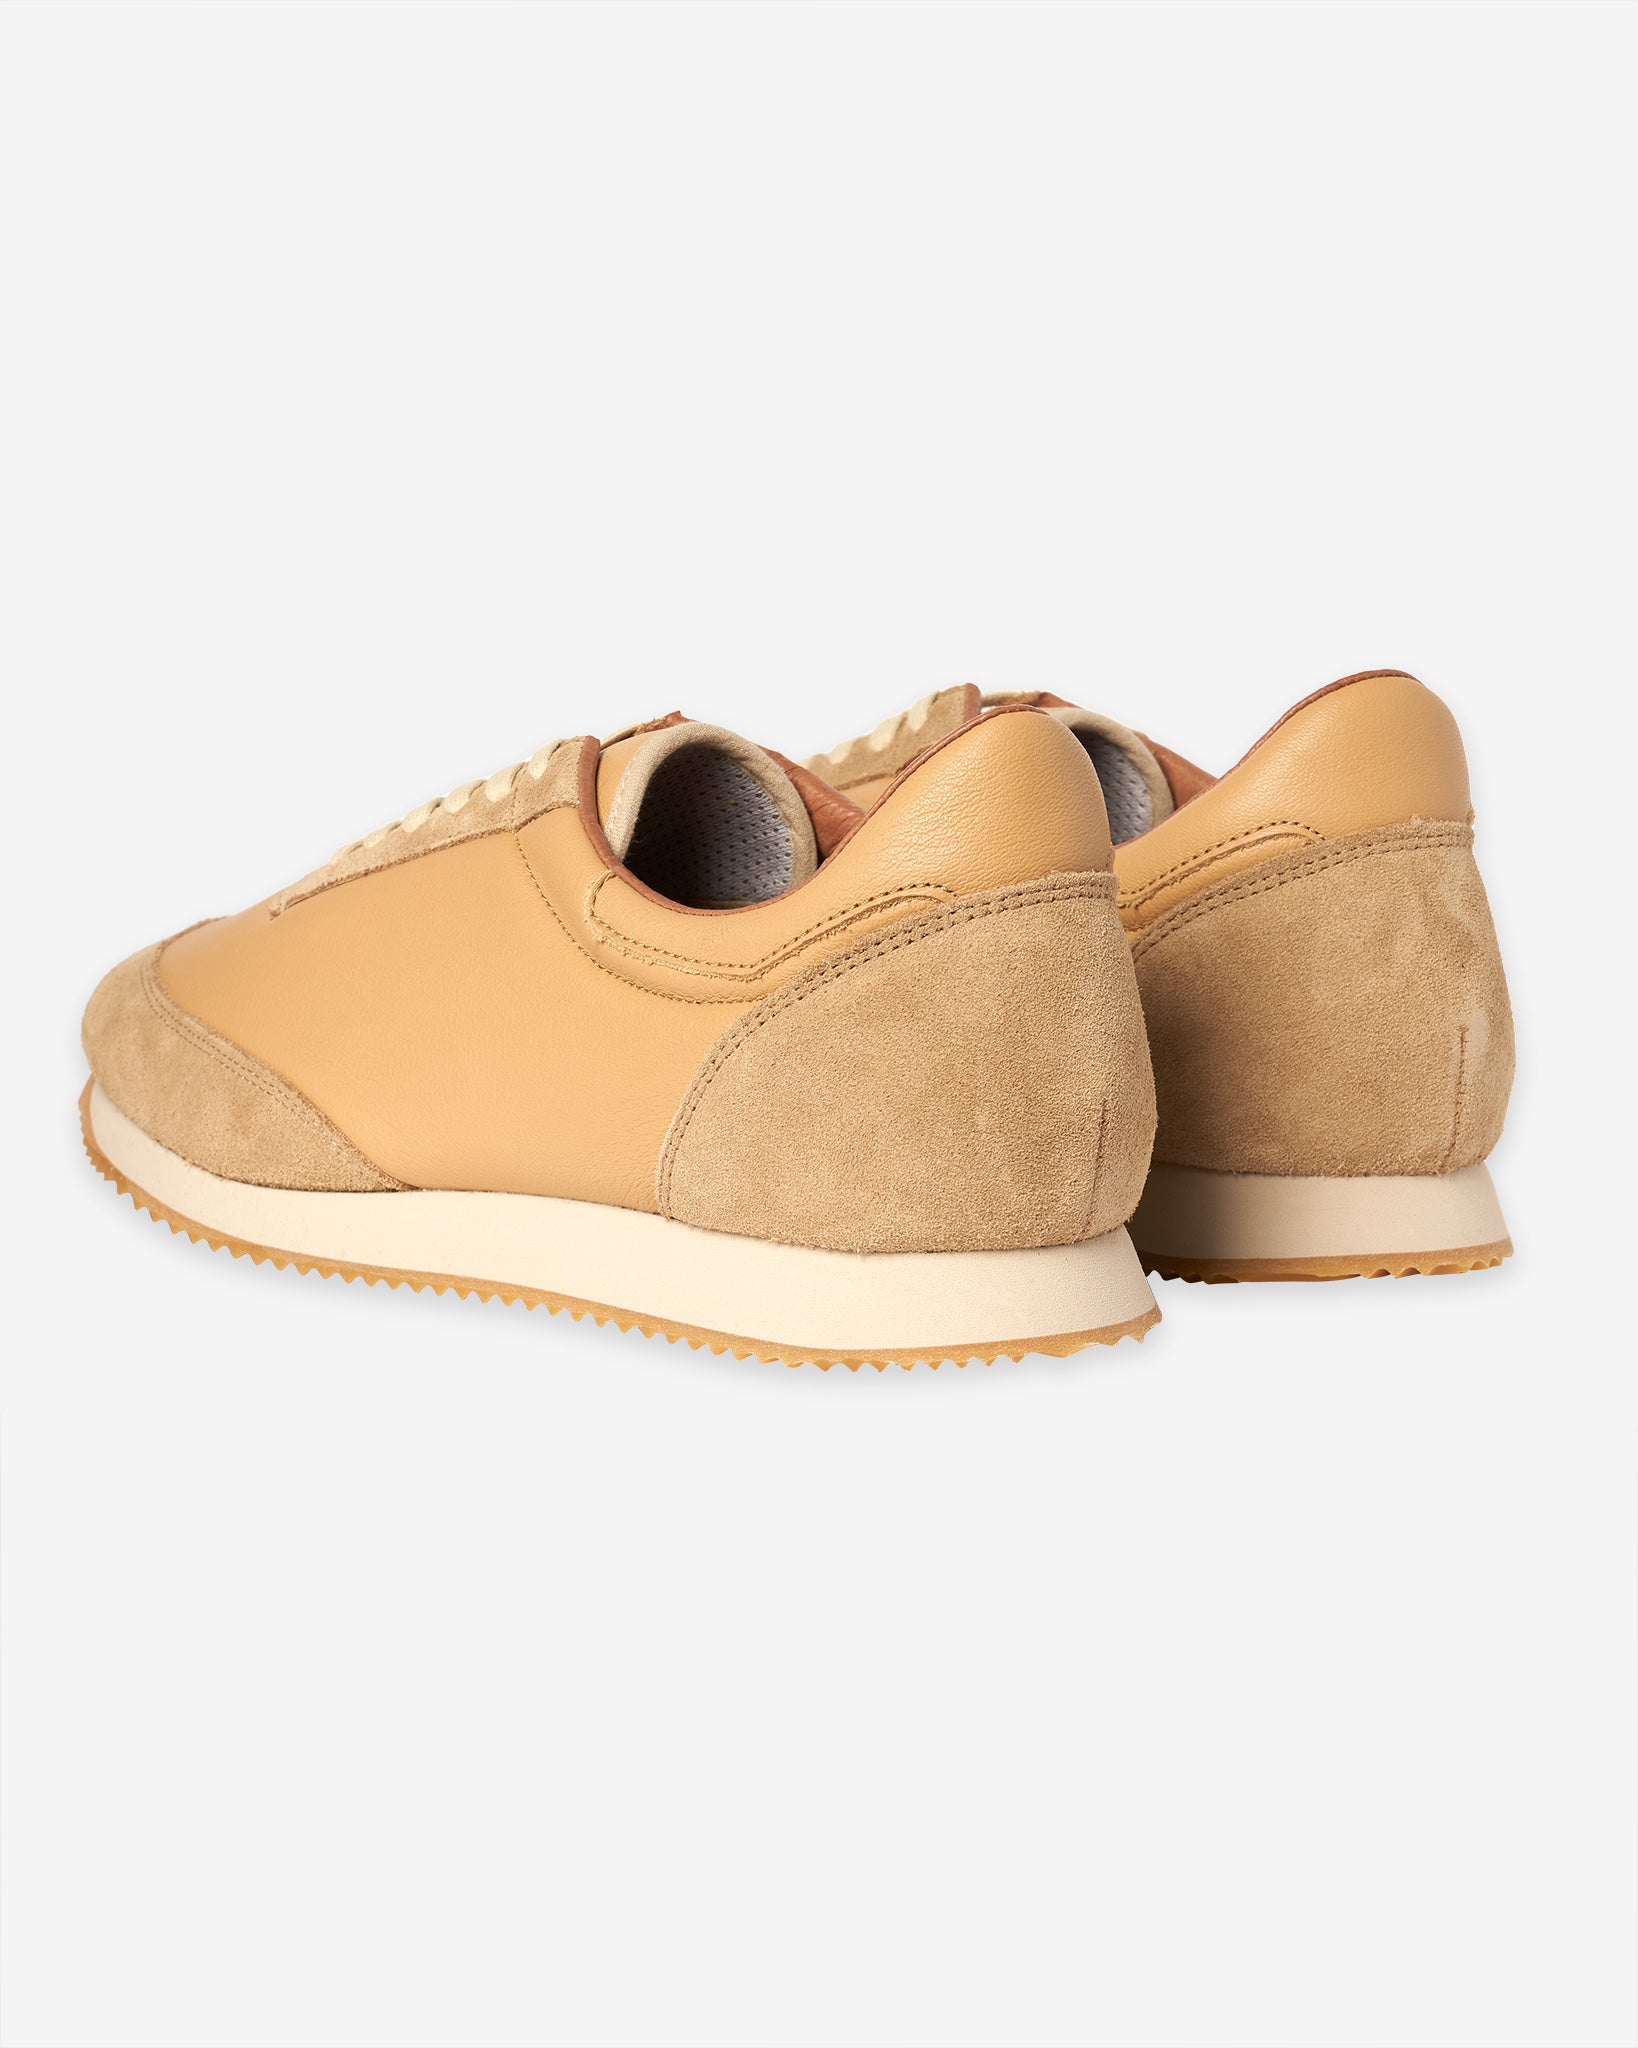 Canadian Military Trainer - Light Beige